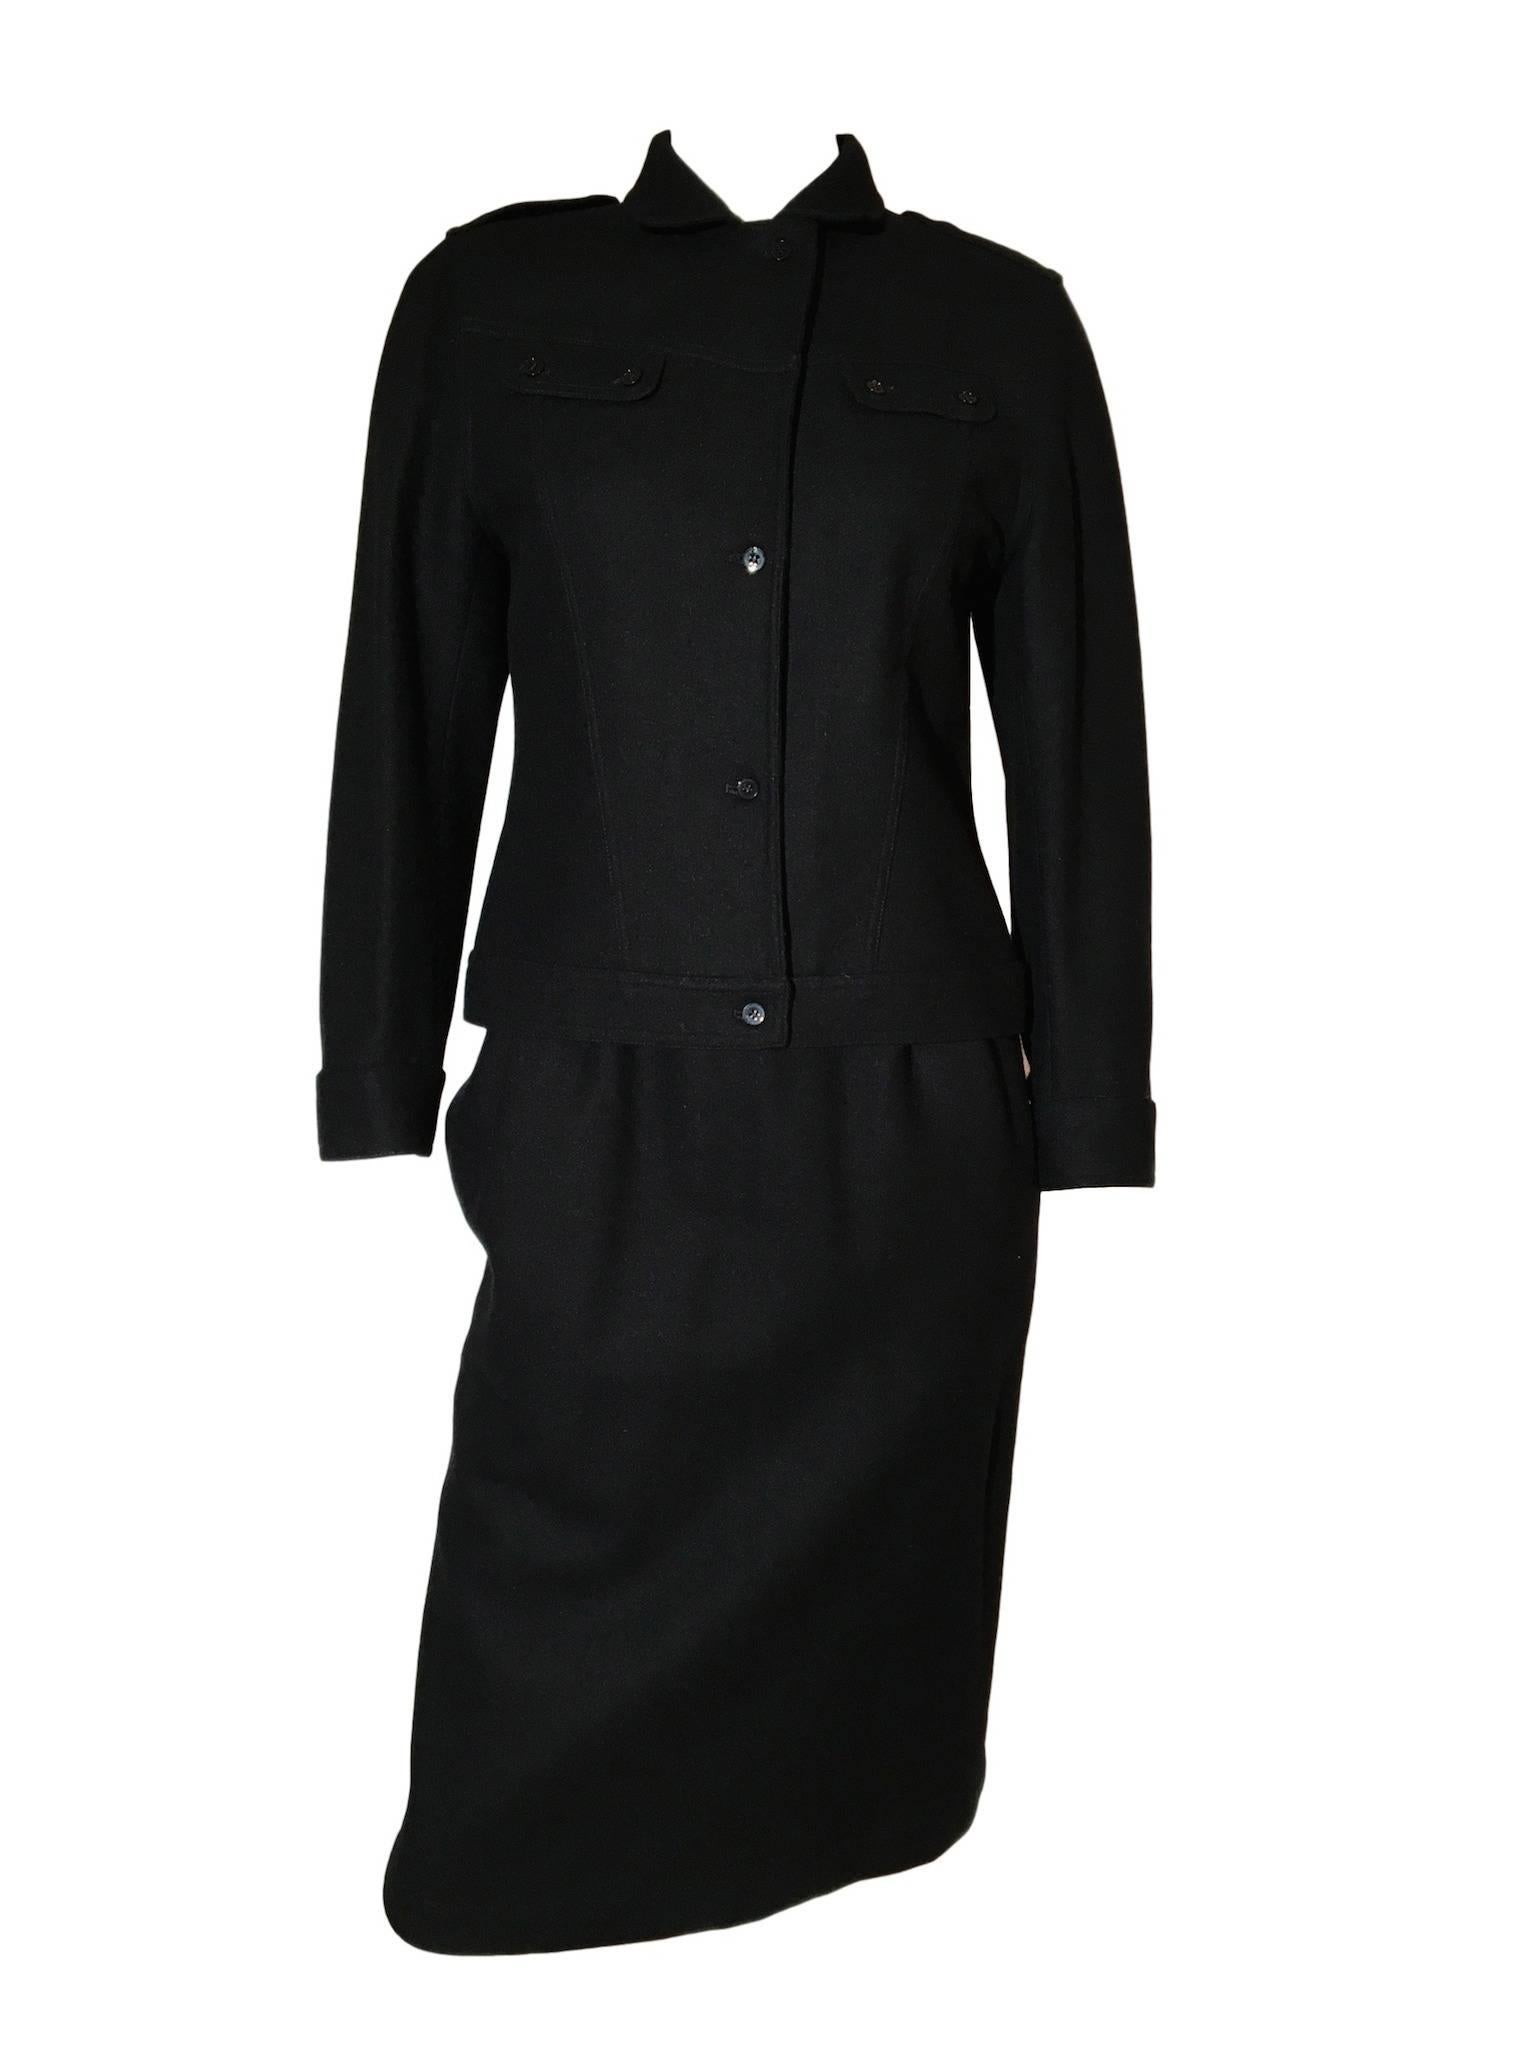 Enrico Coveri black wool skirt and jacket suit, jacket has a military look to it, skirt is high on waist, fitted and just above knee length, it fastens with buttons only, a vert unusual but clever feature.

Size UK 8 Measures 17 inches across bust